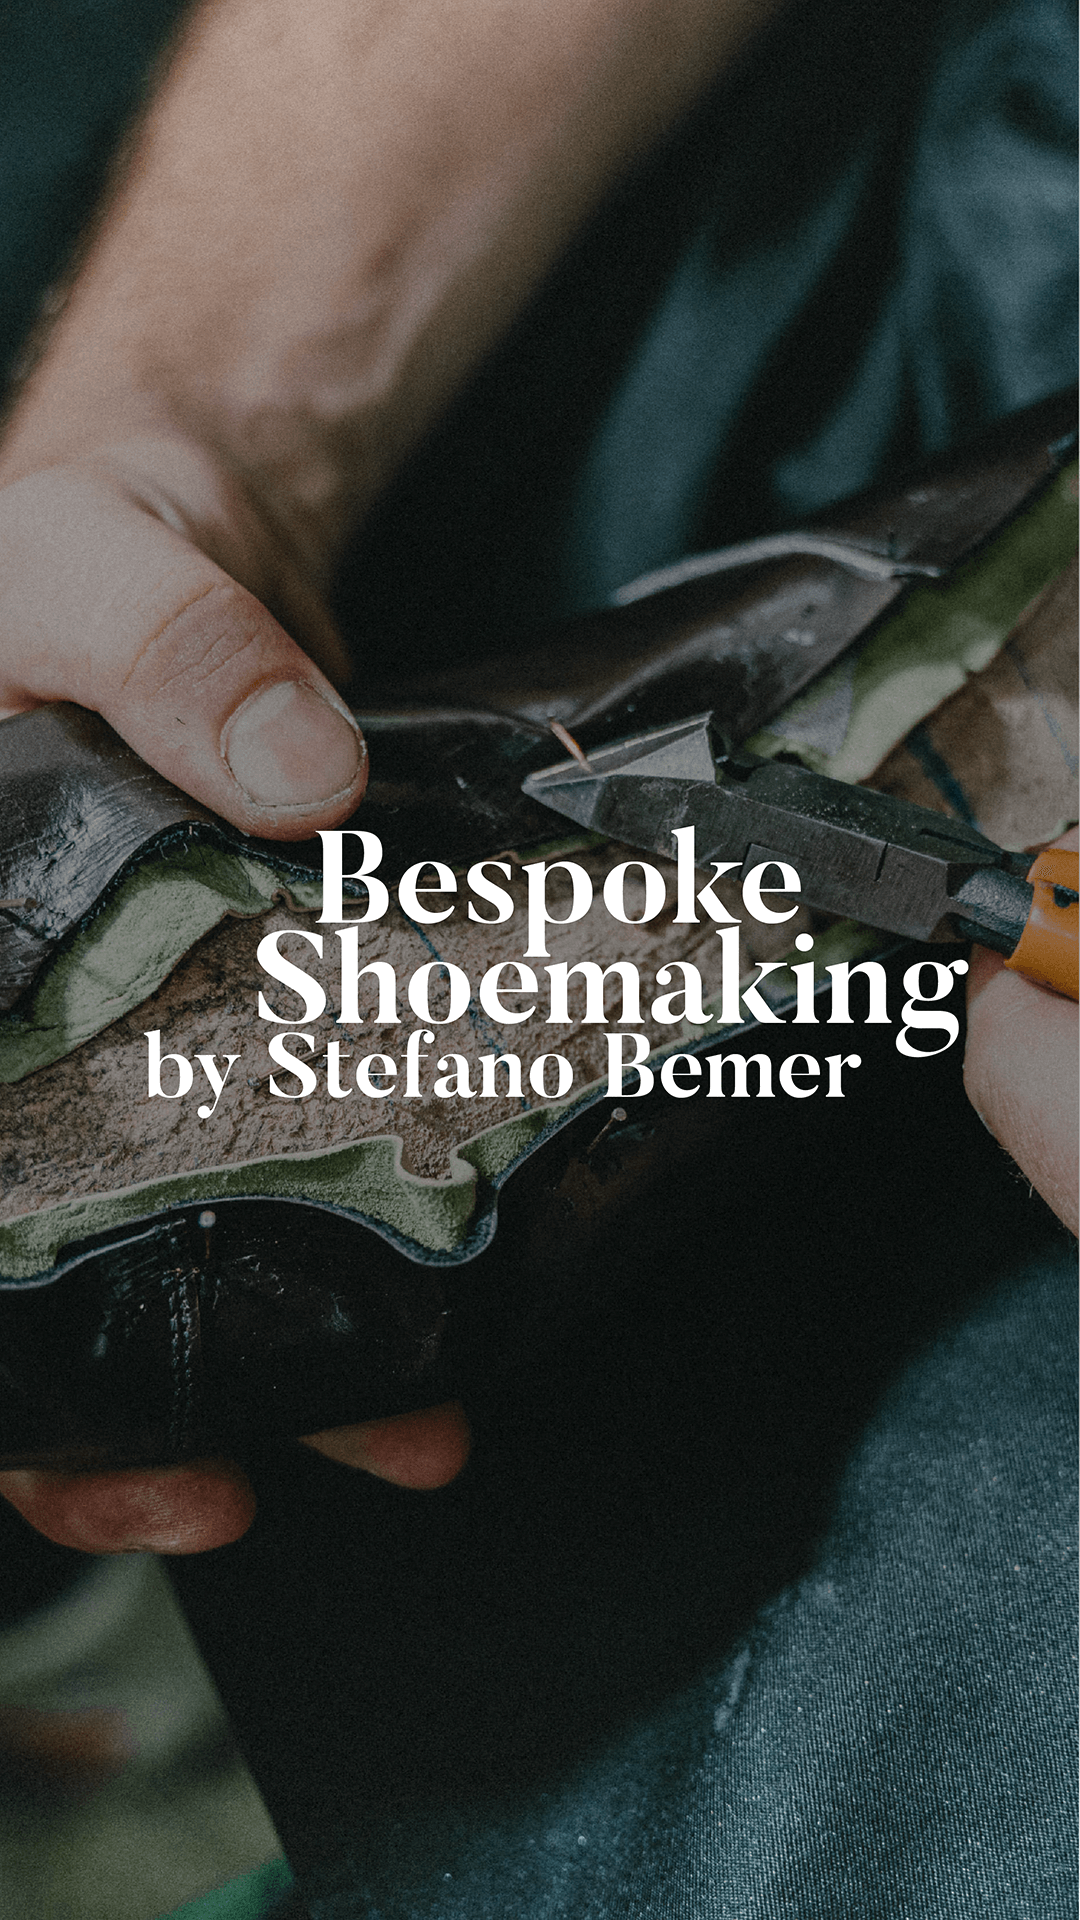 Bespoke shoemaking course in Italy